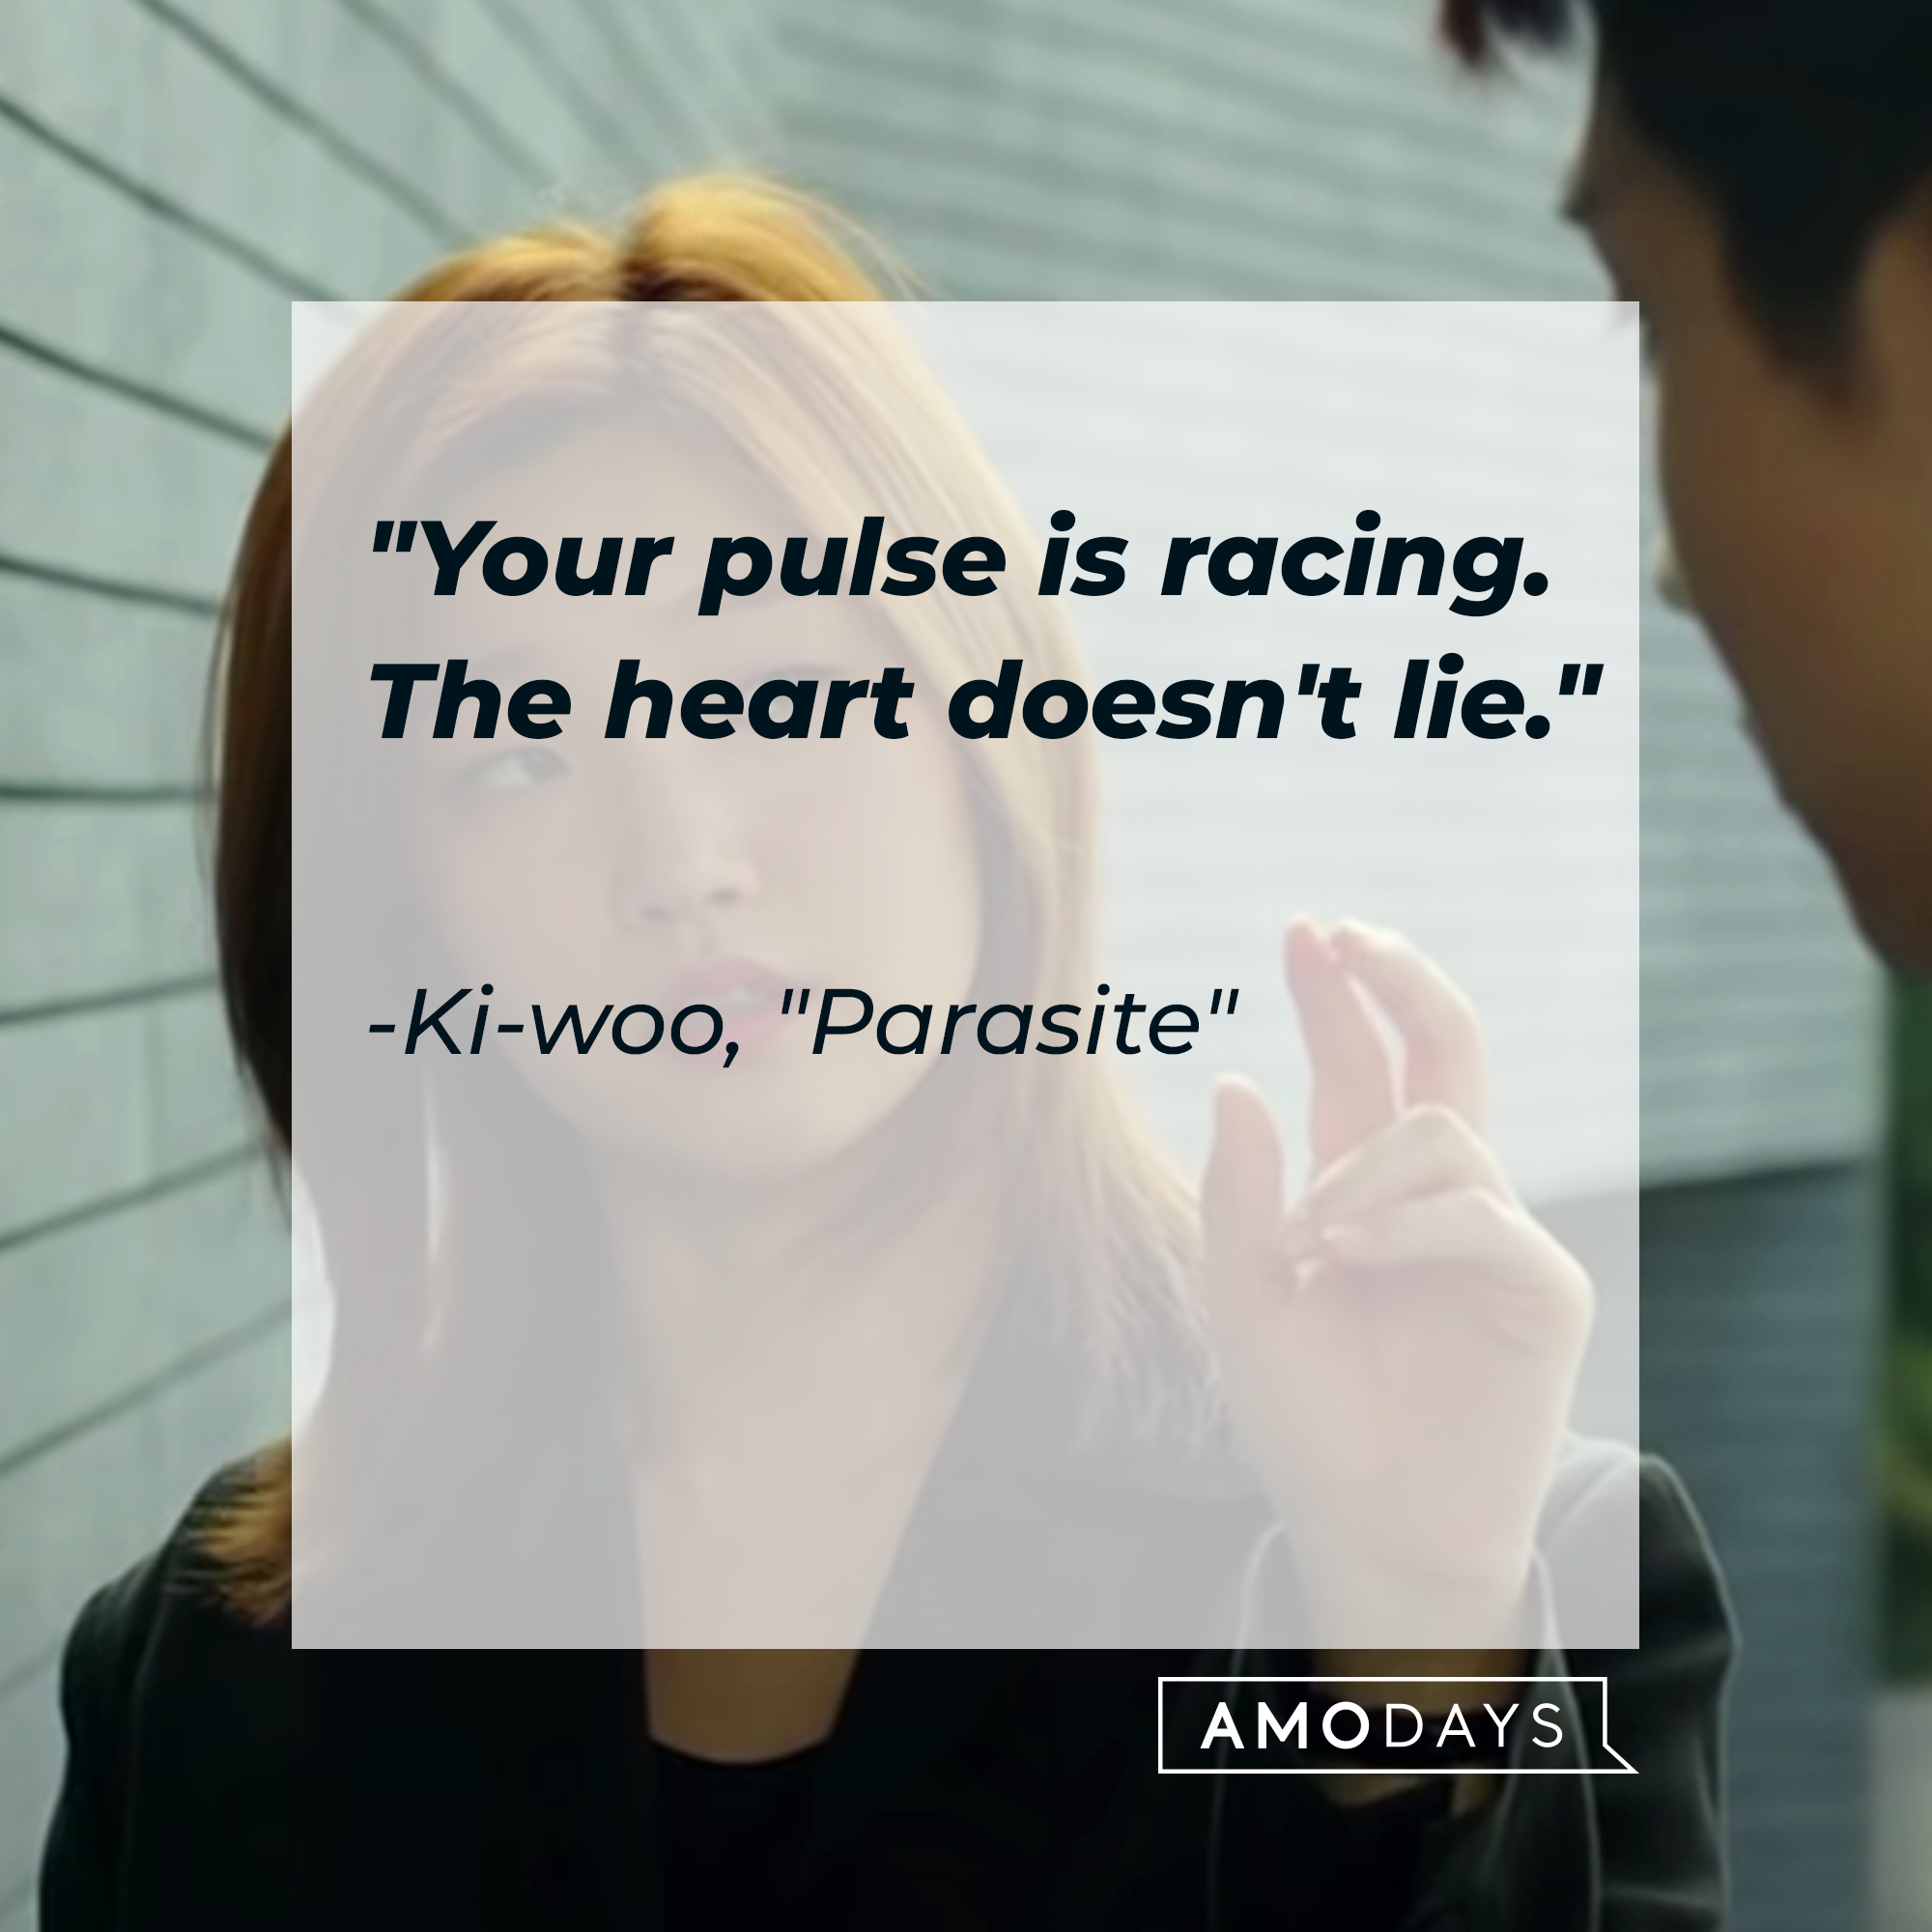 Ki-jung with Ki-woo's quote: "Your pulse is racing. The heart doesn't lie."  | Source: Facebook.com/ParasiteMovie